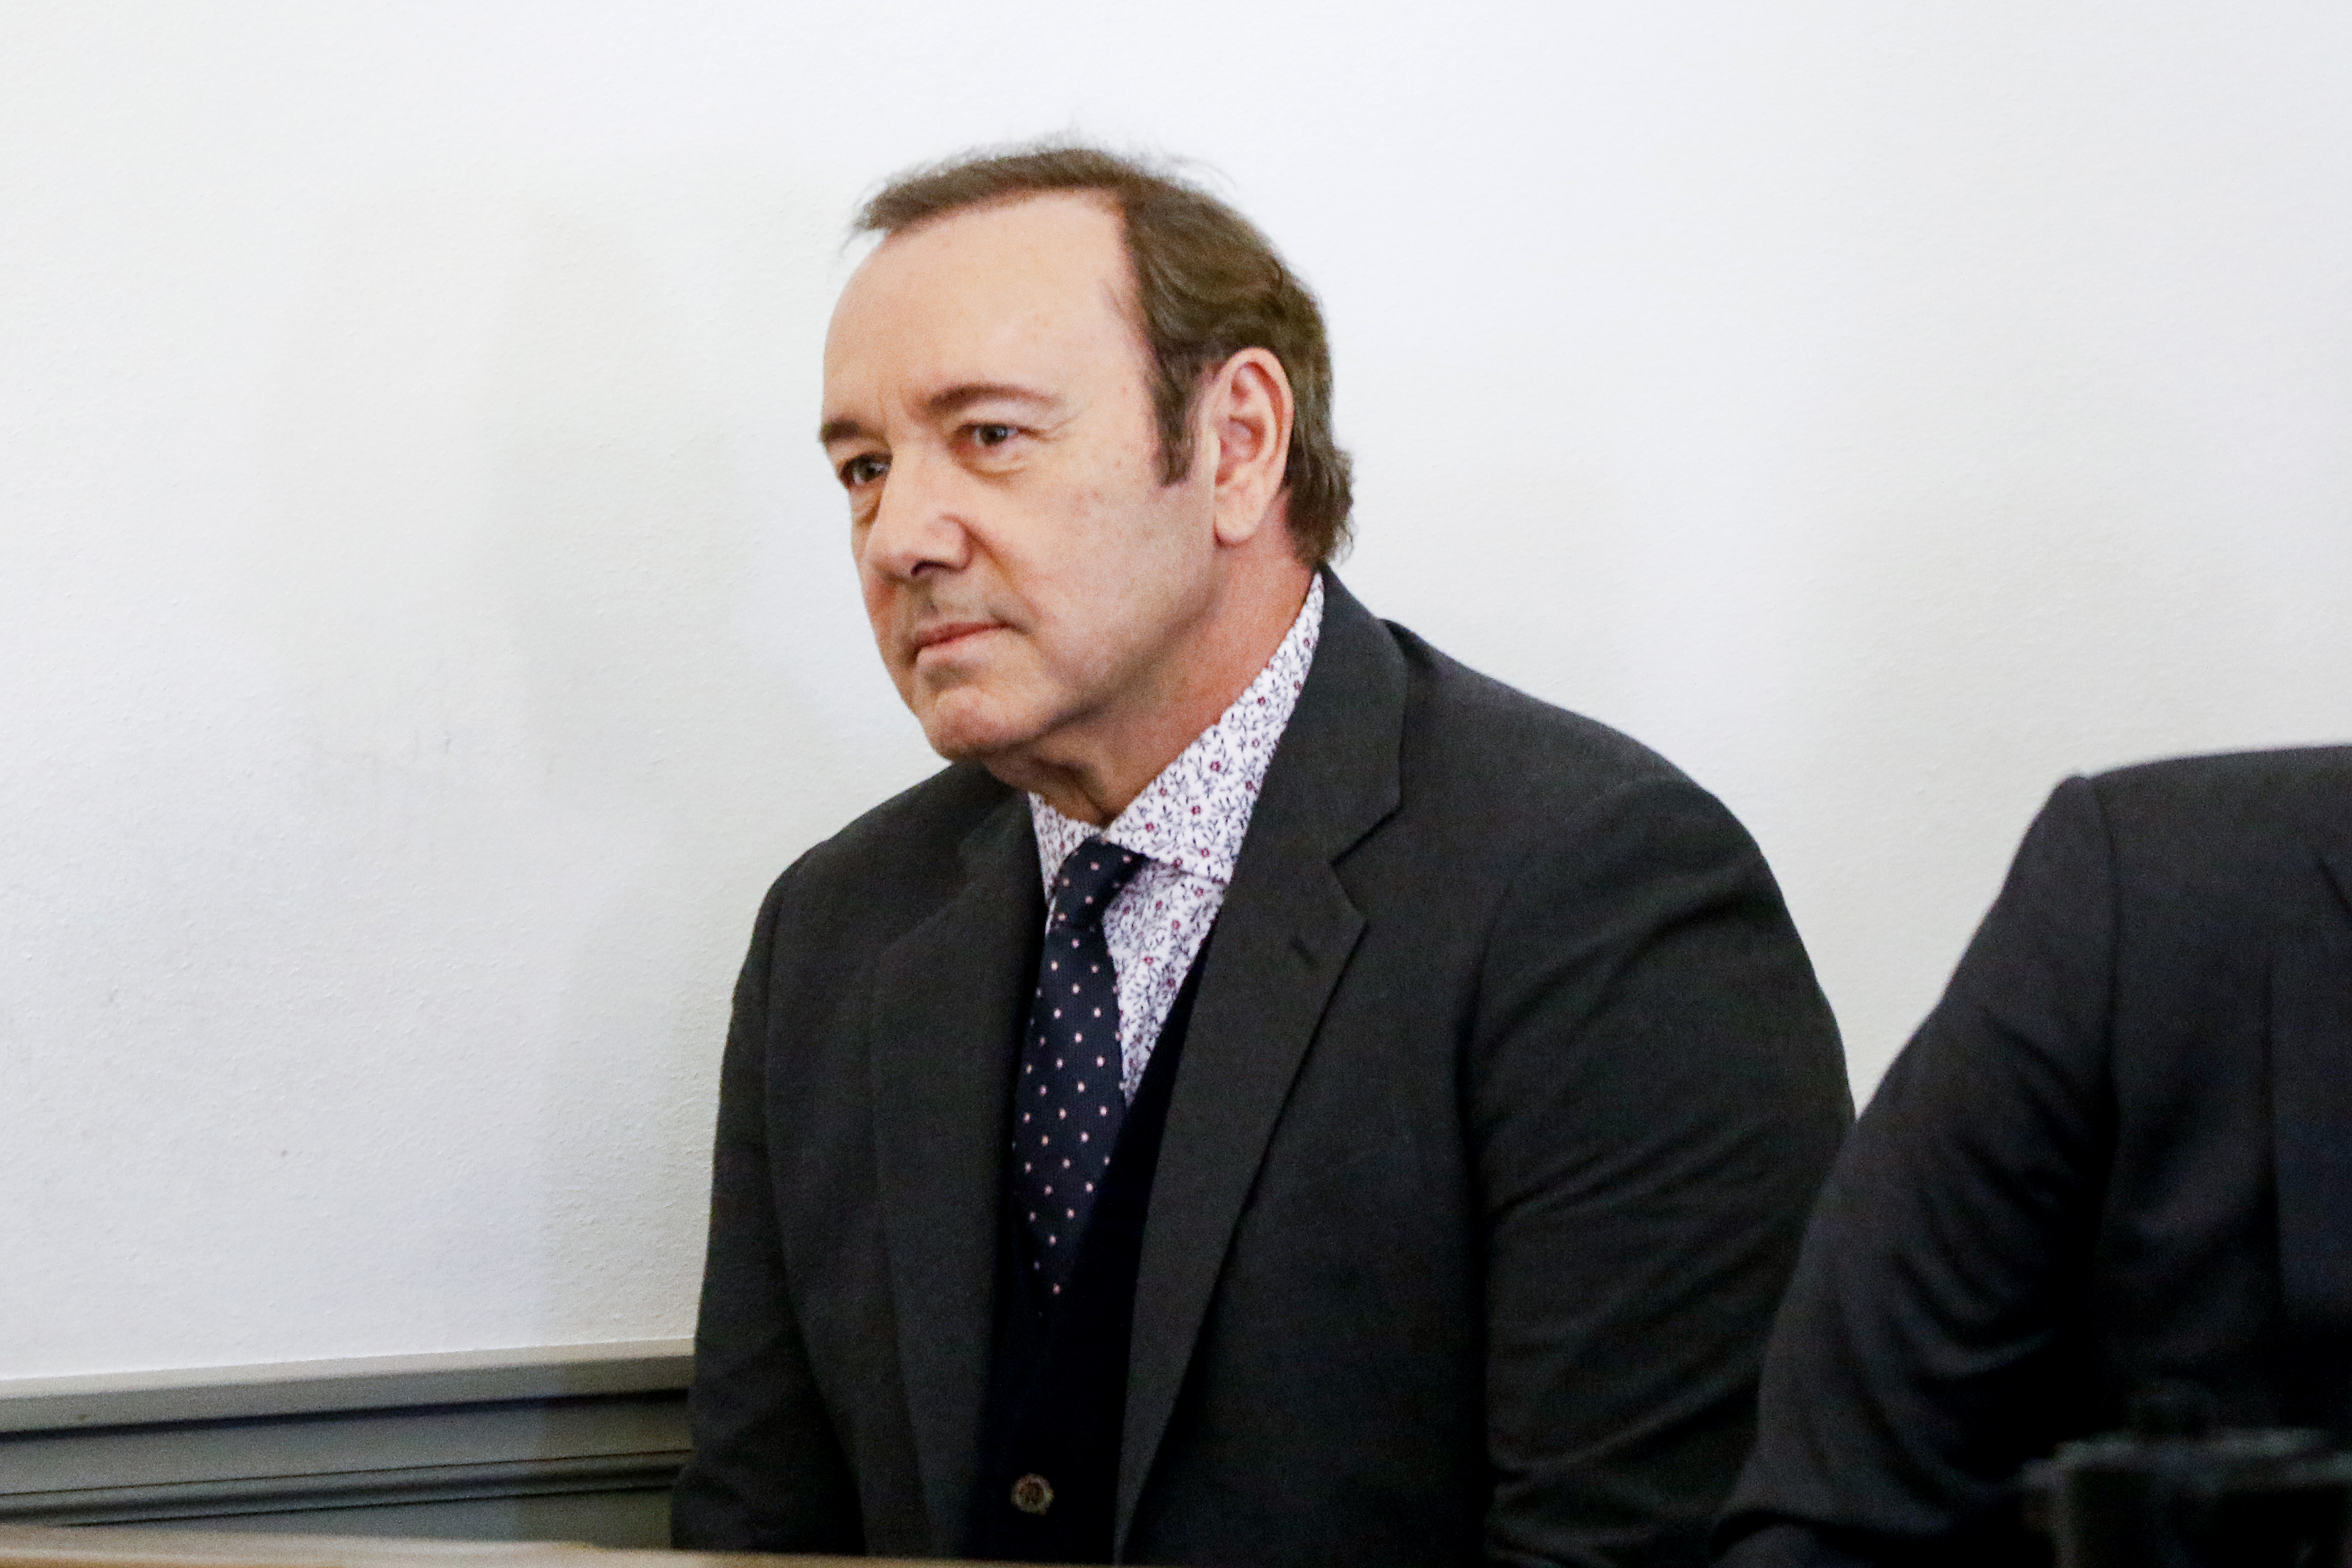 Kevin Spacey Case Dropped: Here’s What We Know